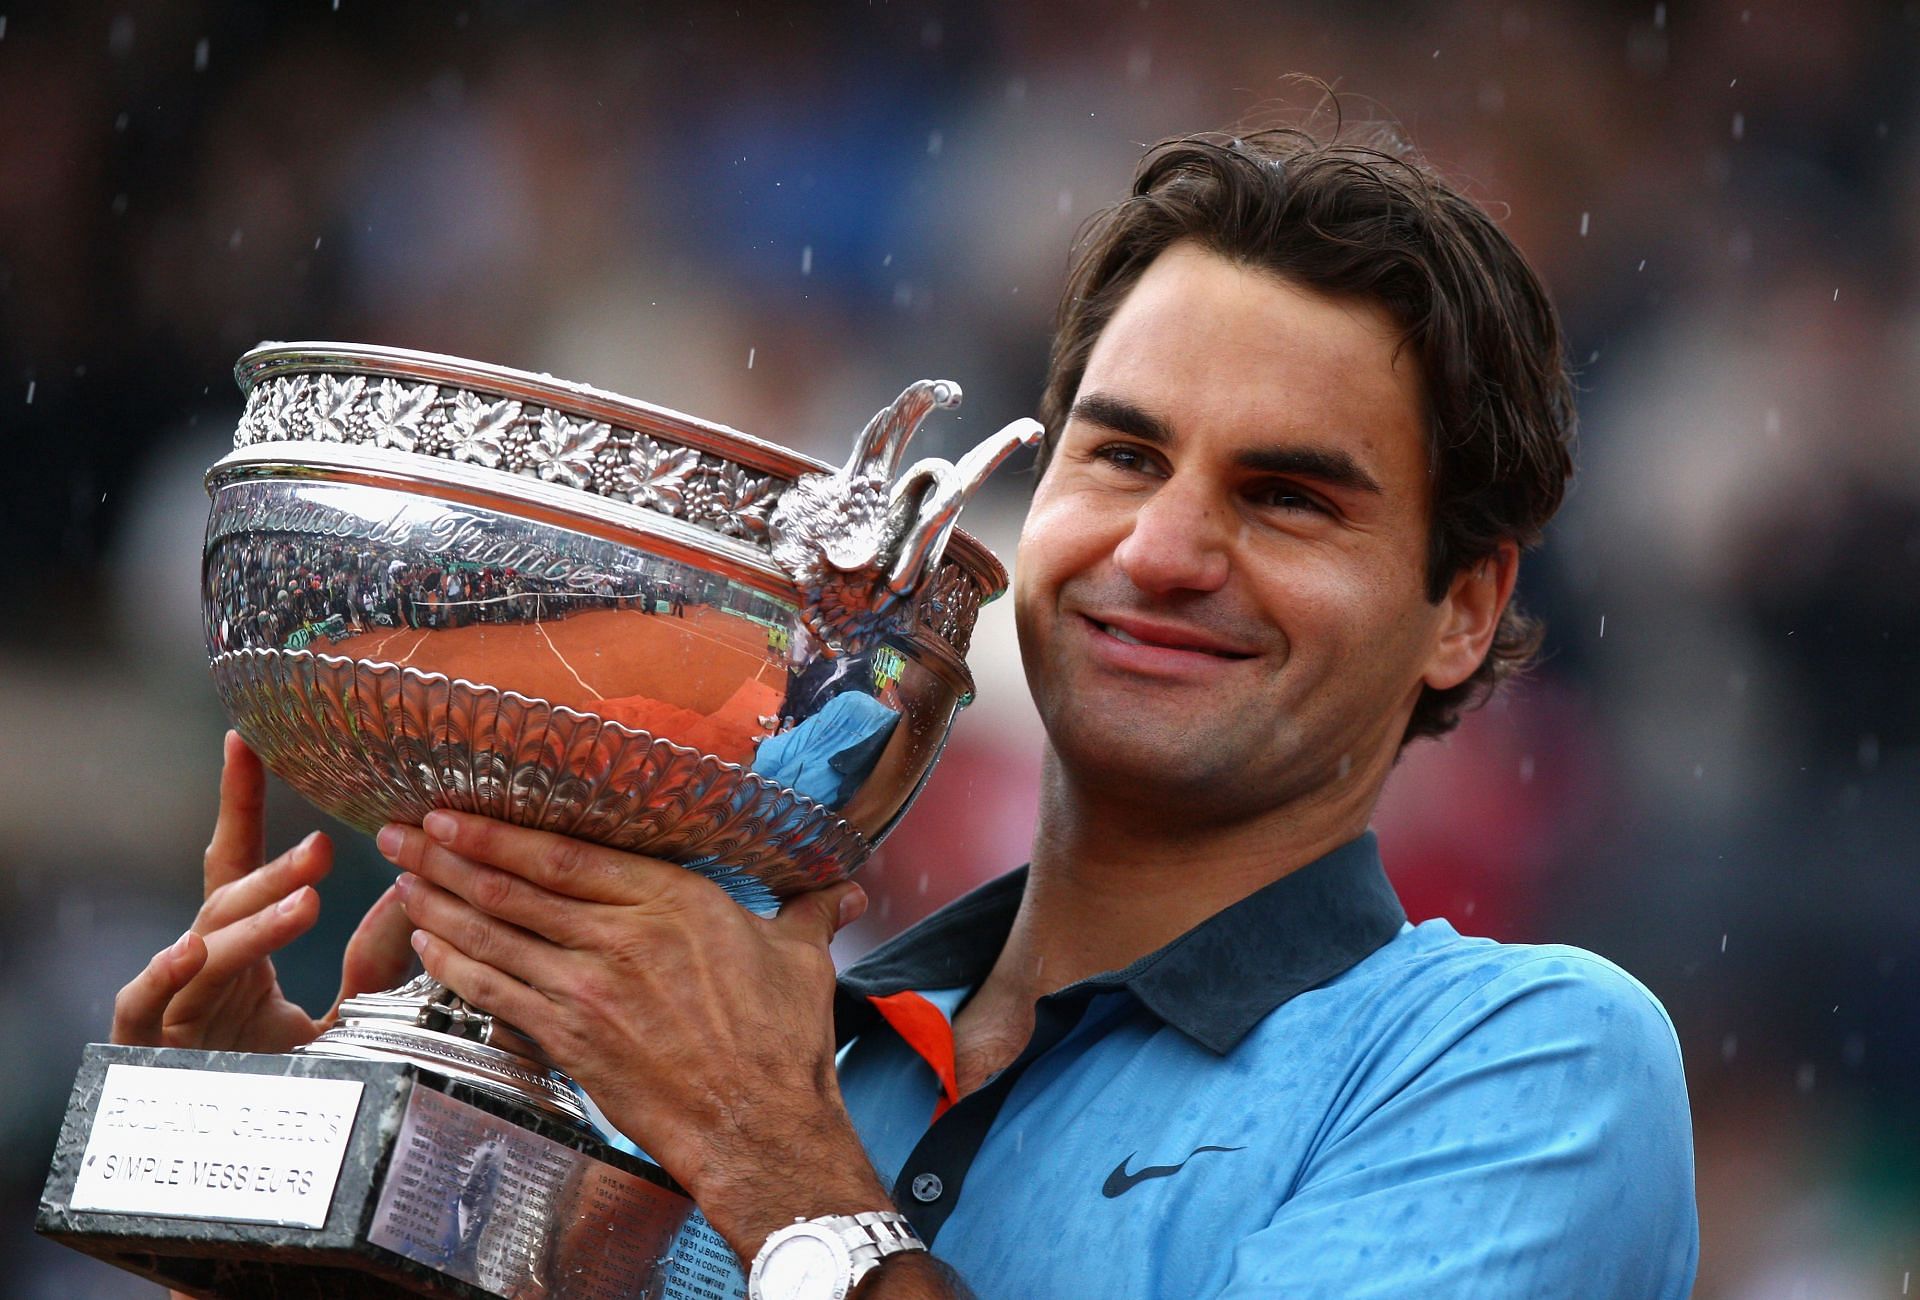 Roger Federer won the 2009 French Open to complete his Major collection on every surface